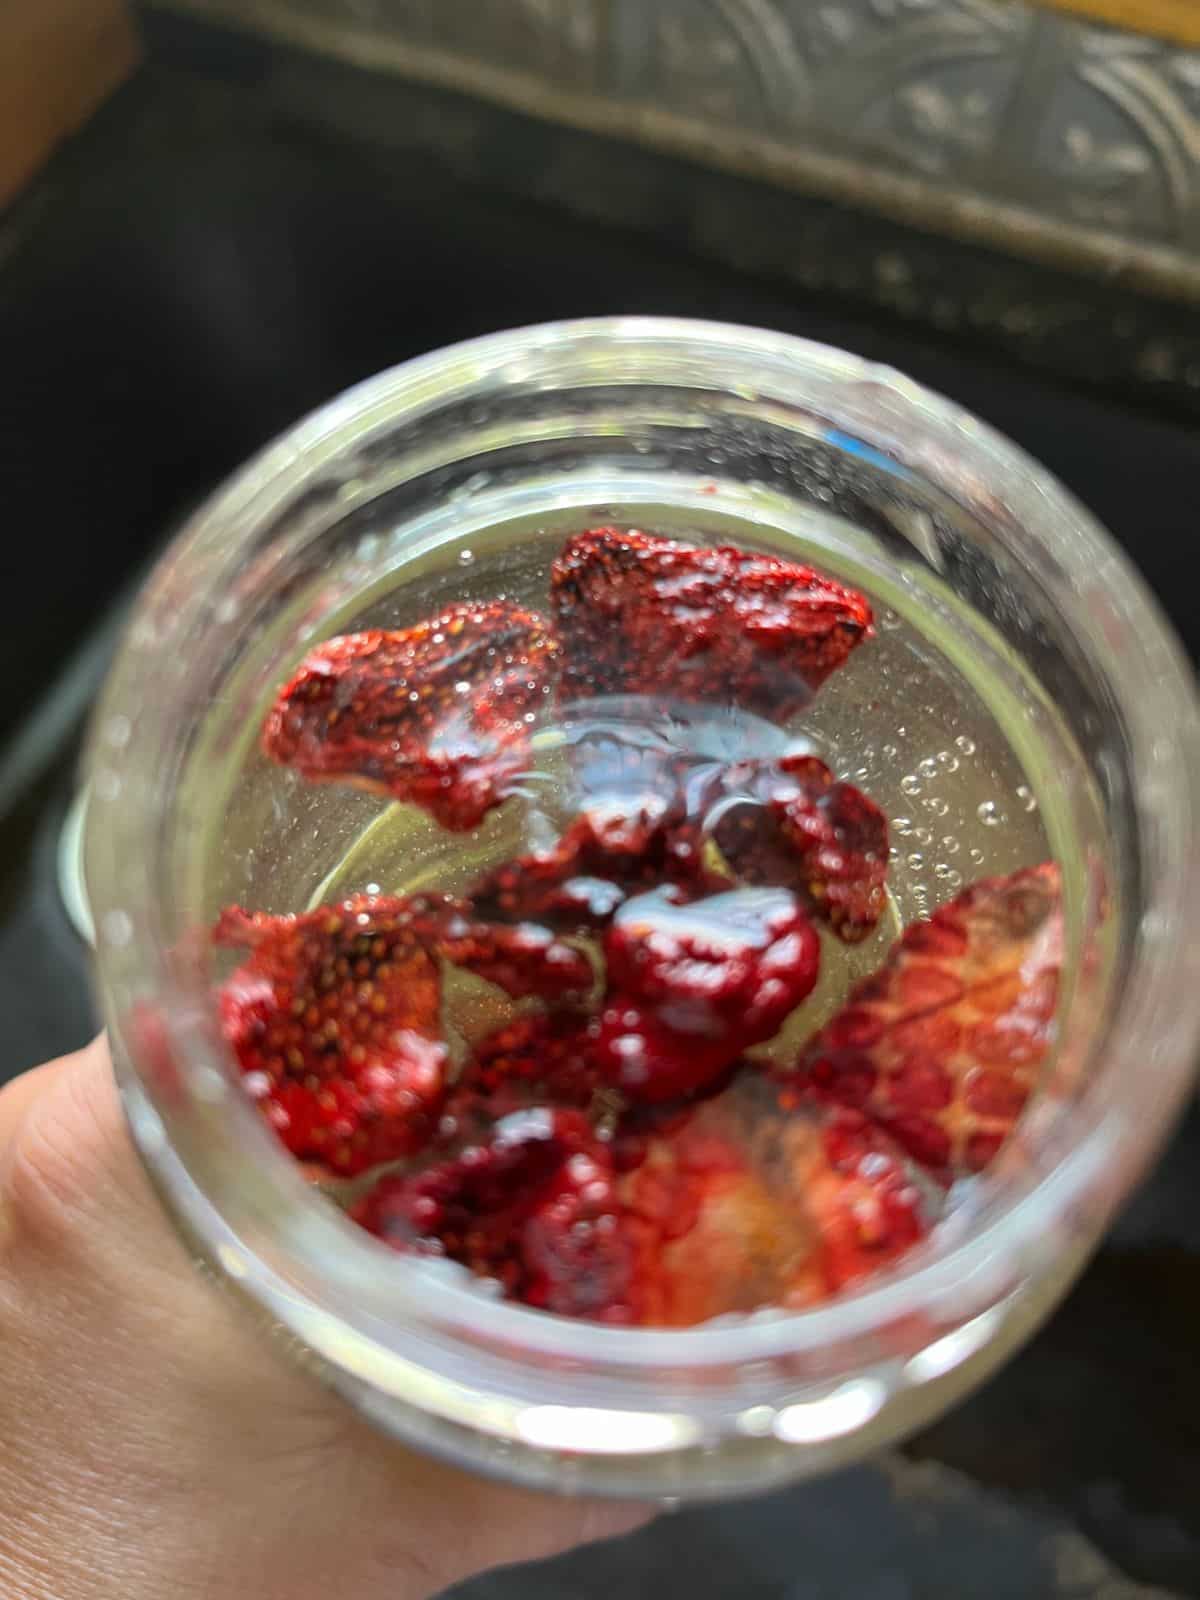 An infused water made with dehydrated strawberries